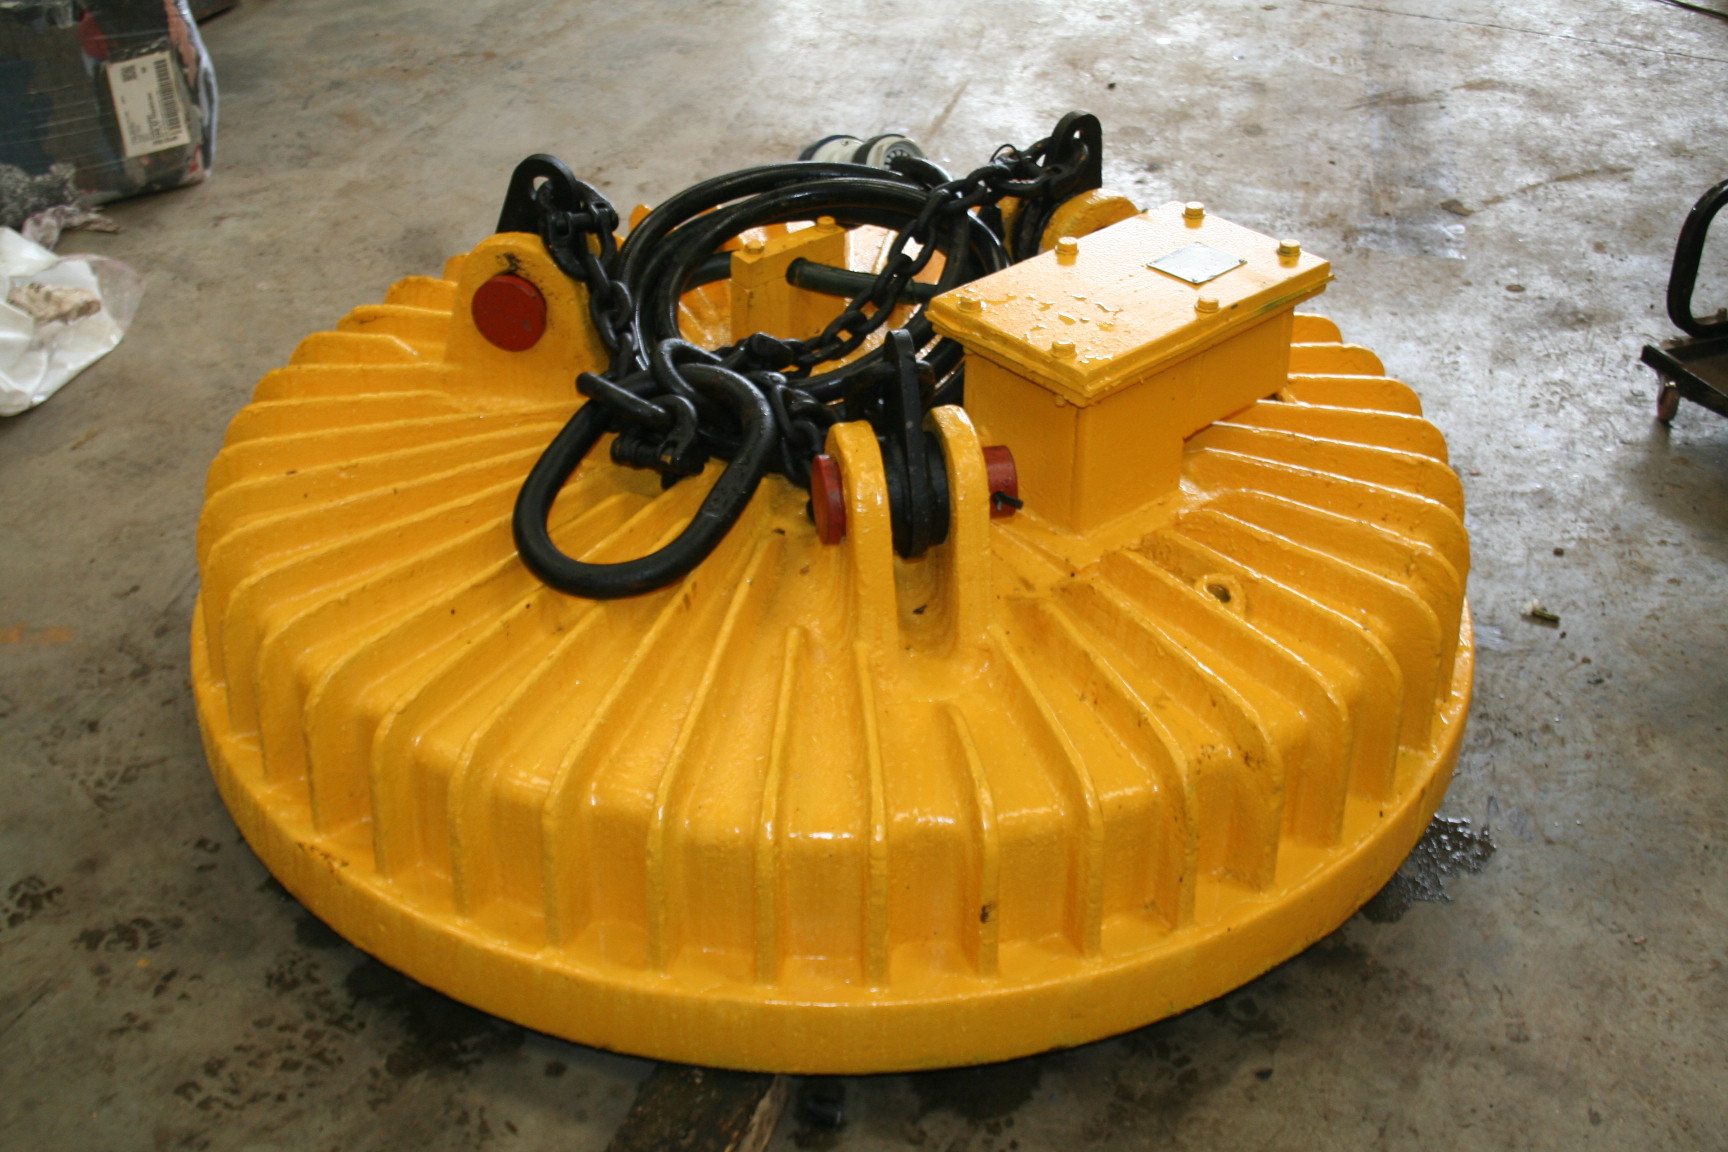 55 inch magnet fully reconditioned rated 6.5 KW at 220 volts weight 1.4 KG